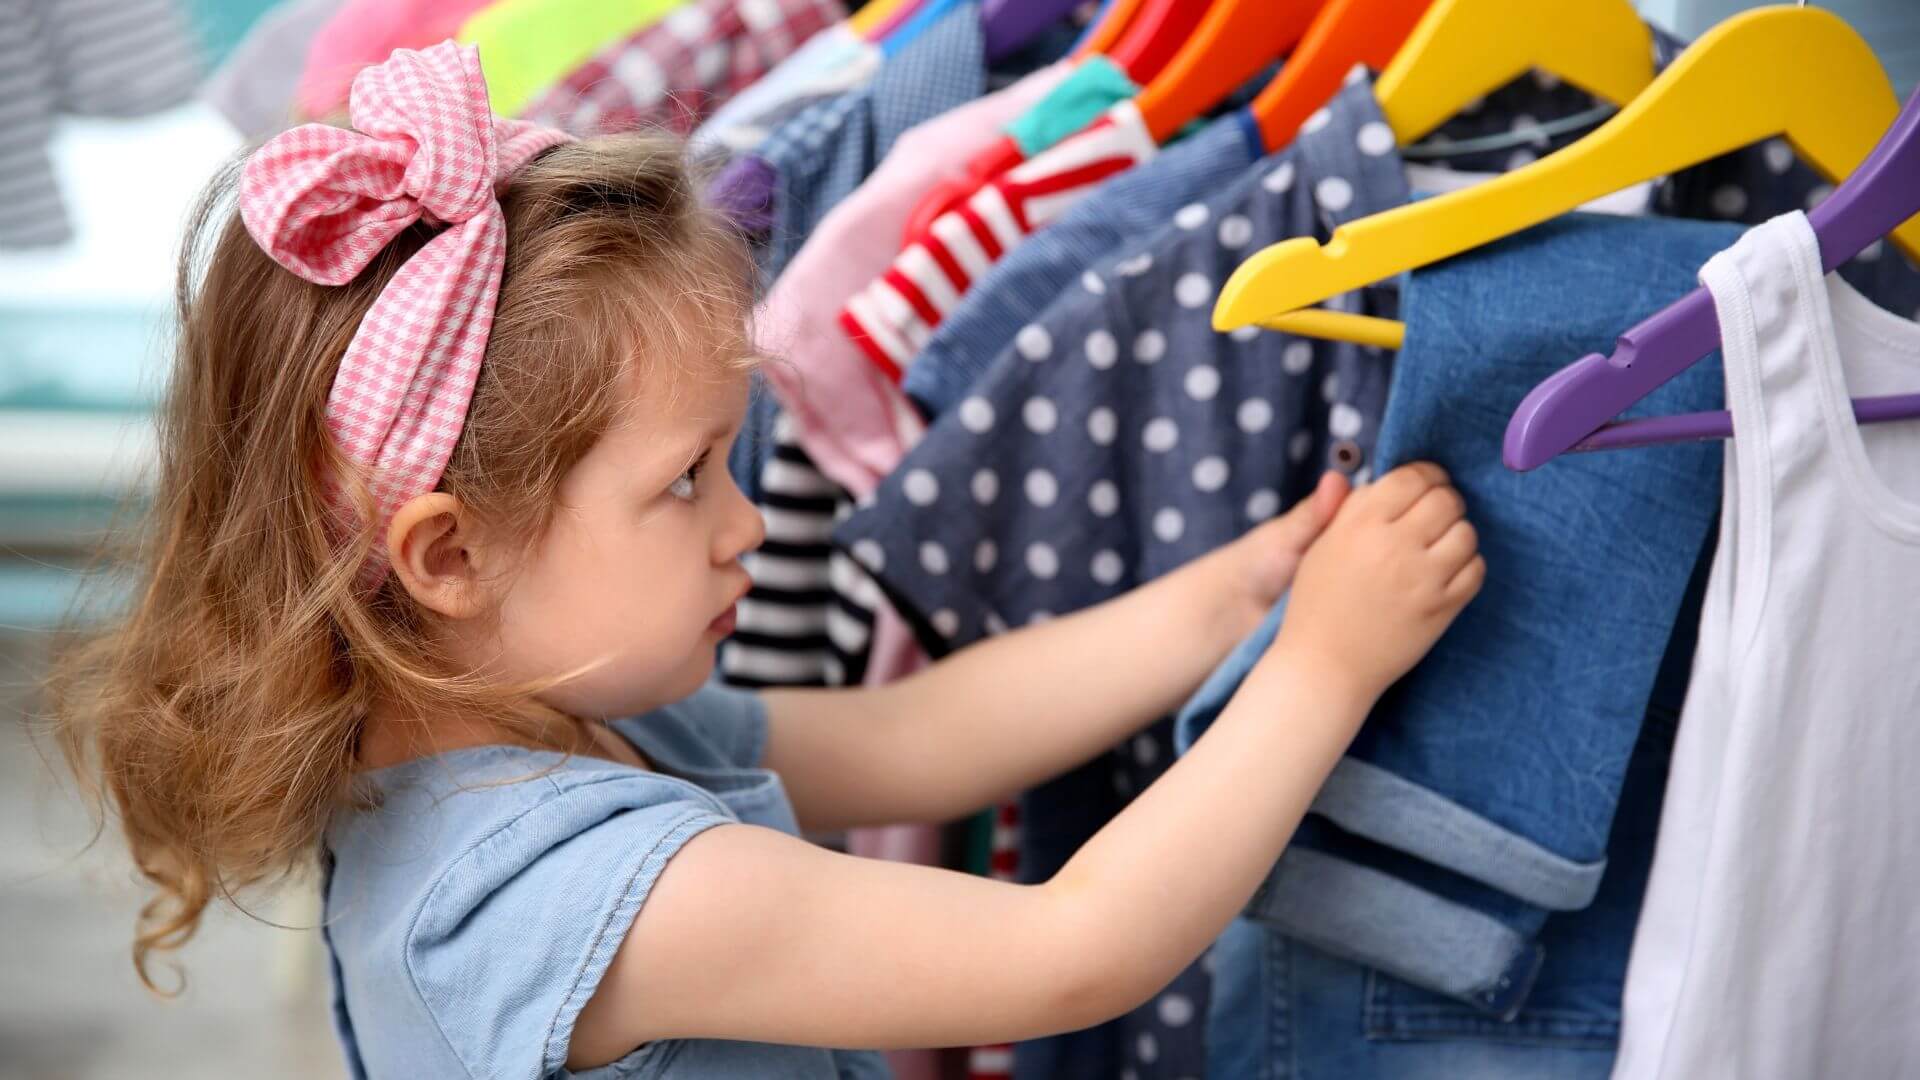 How to Purchase High-End Clothing Items for Your Kids